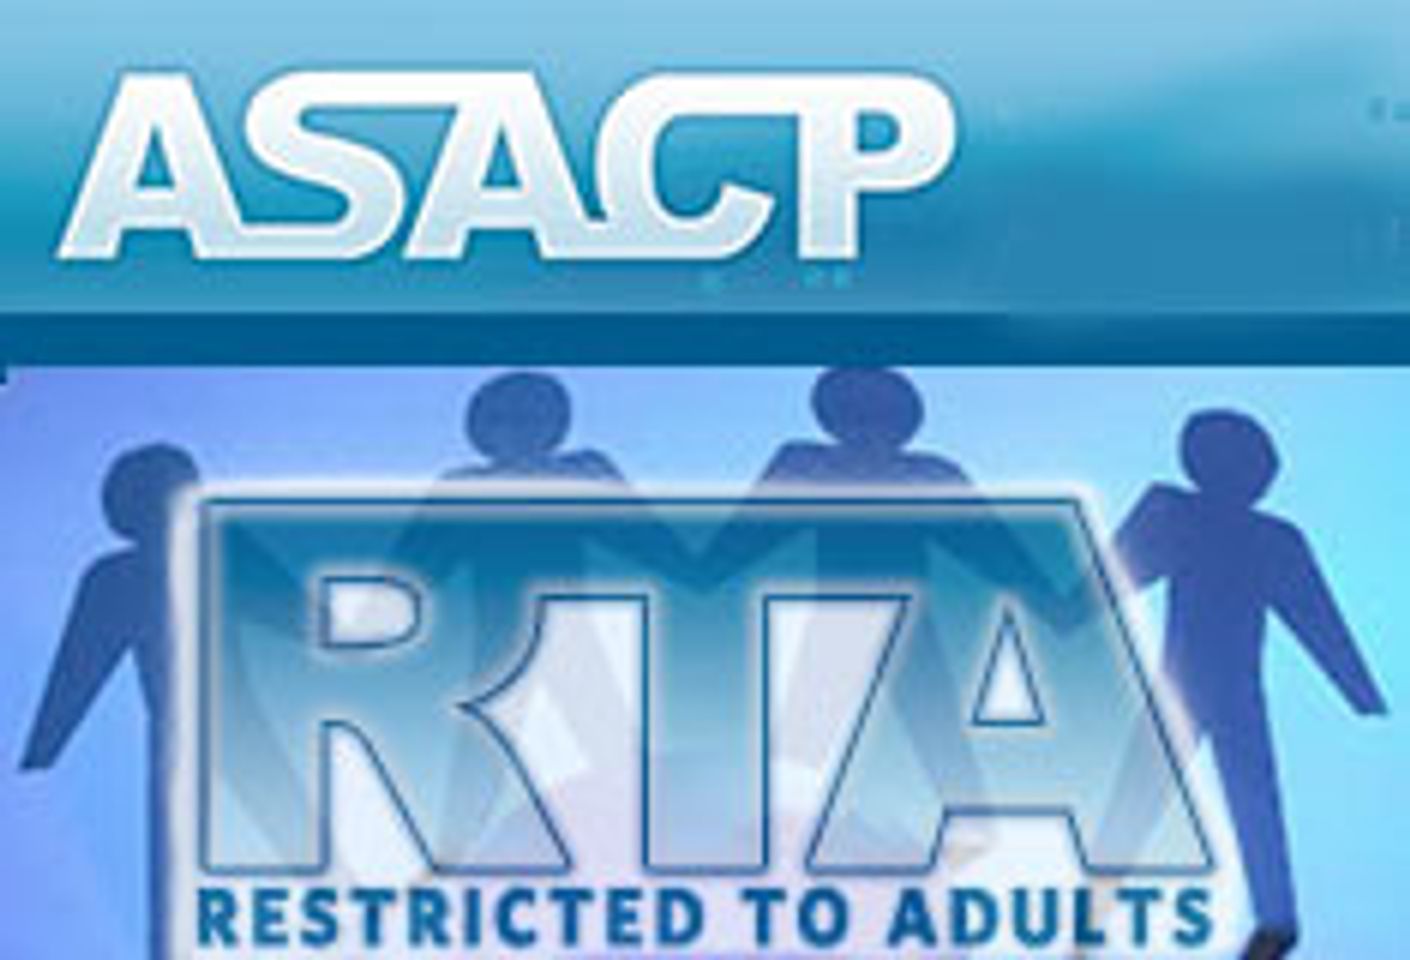 ASACP Announces 'Restricted to Adult' Site Label